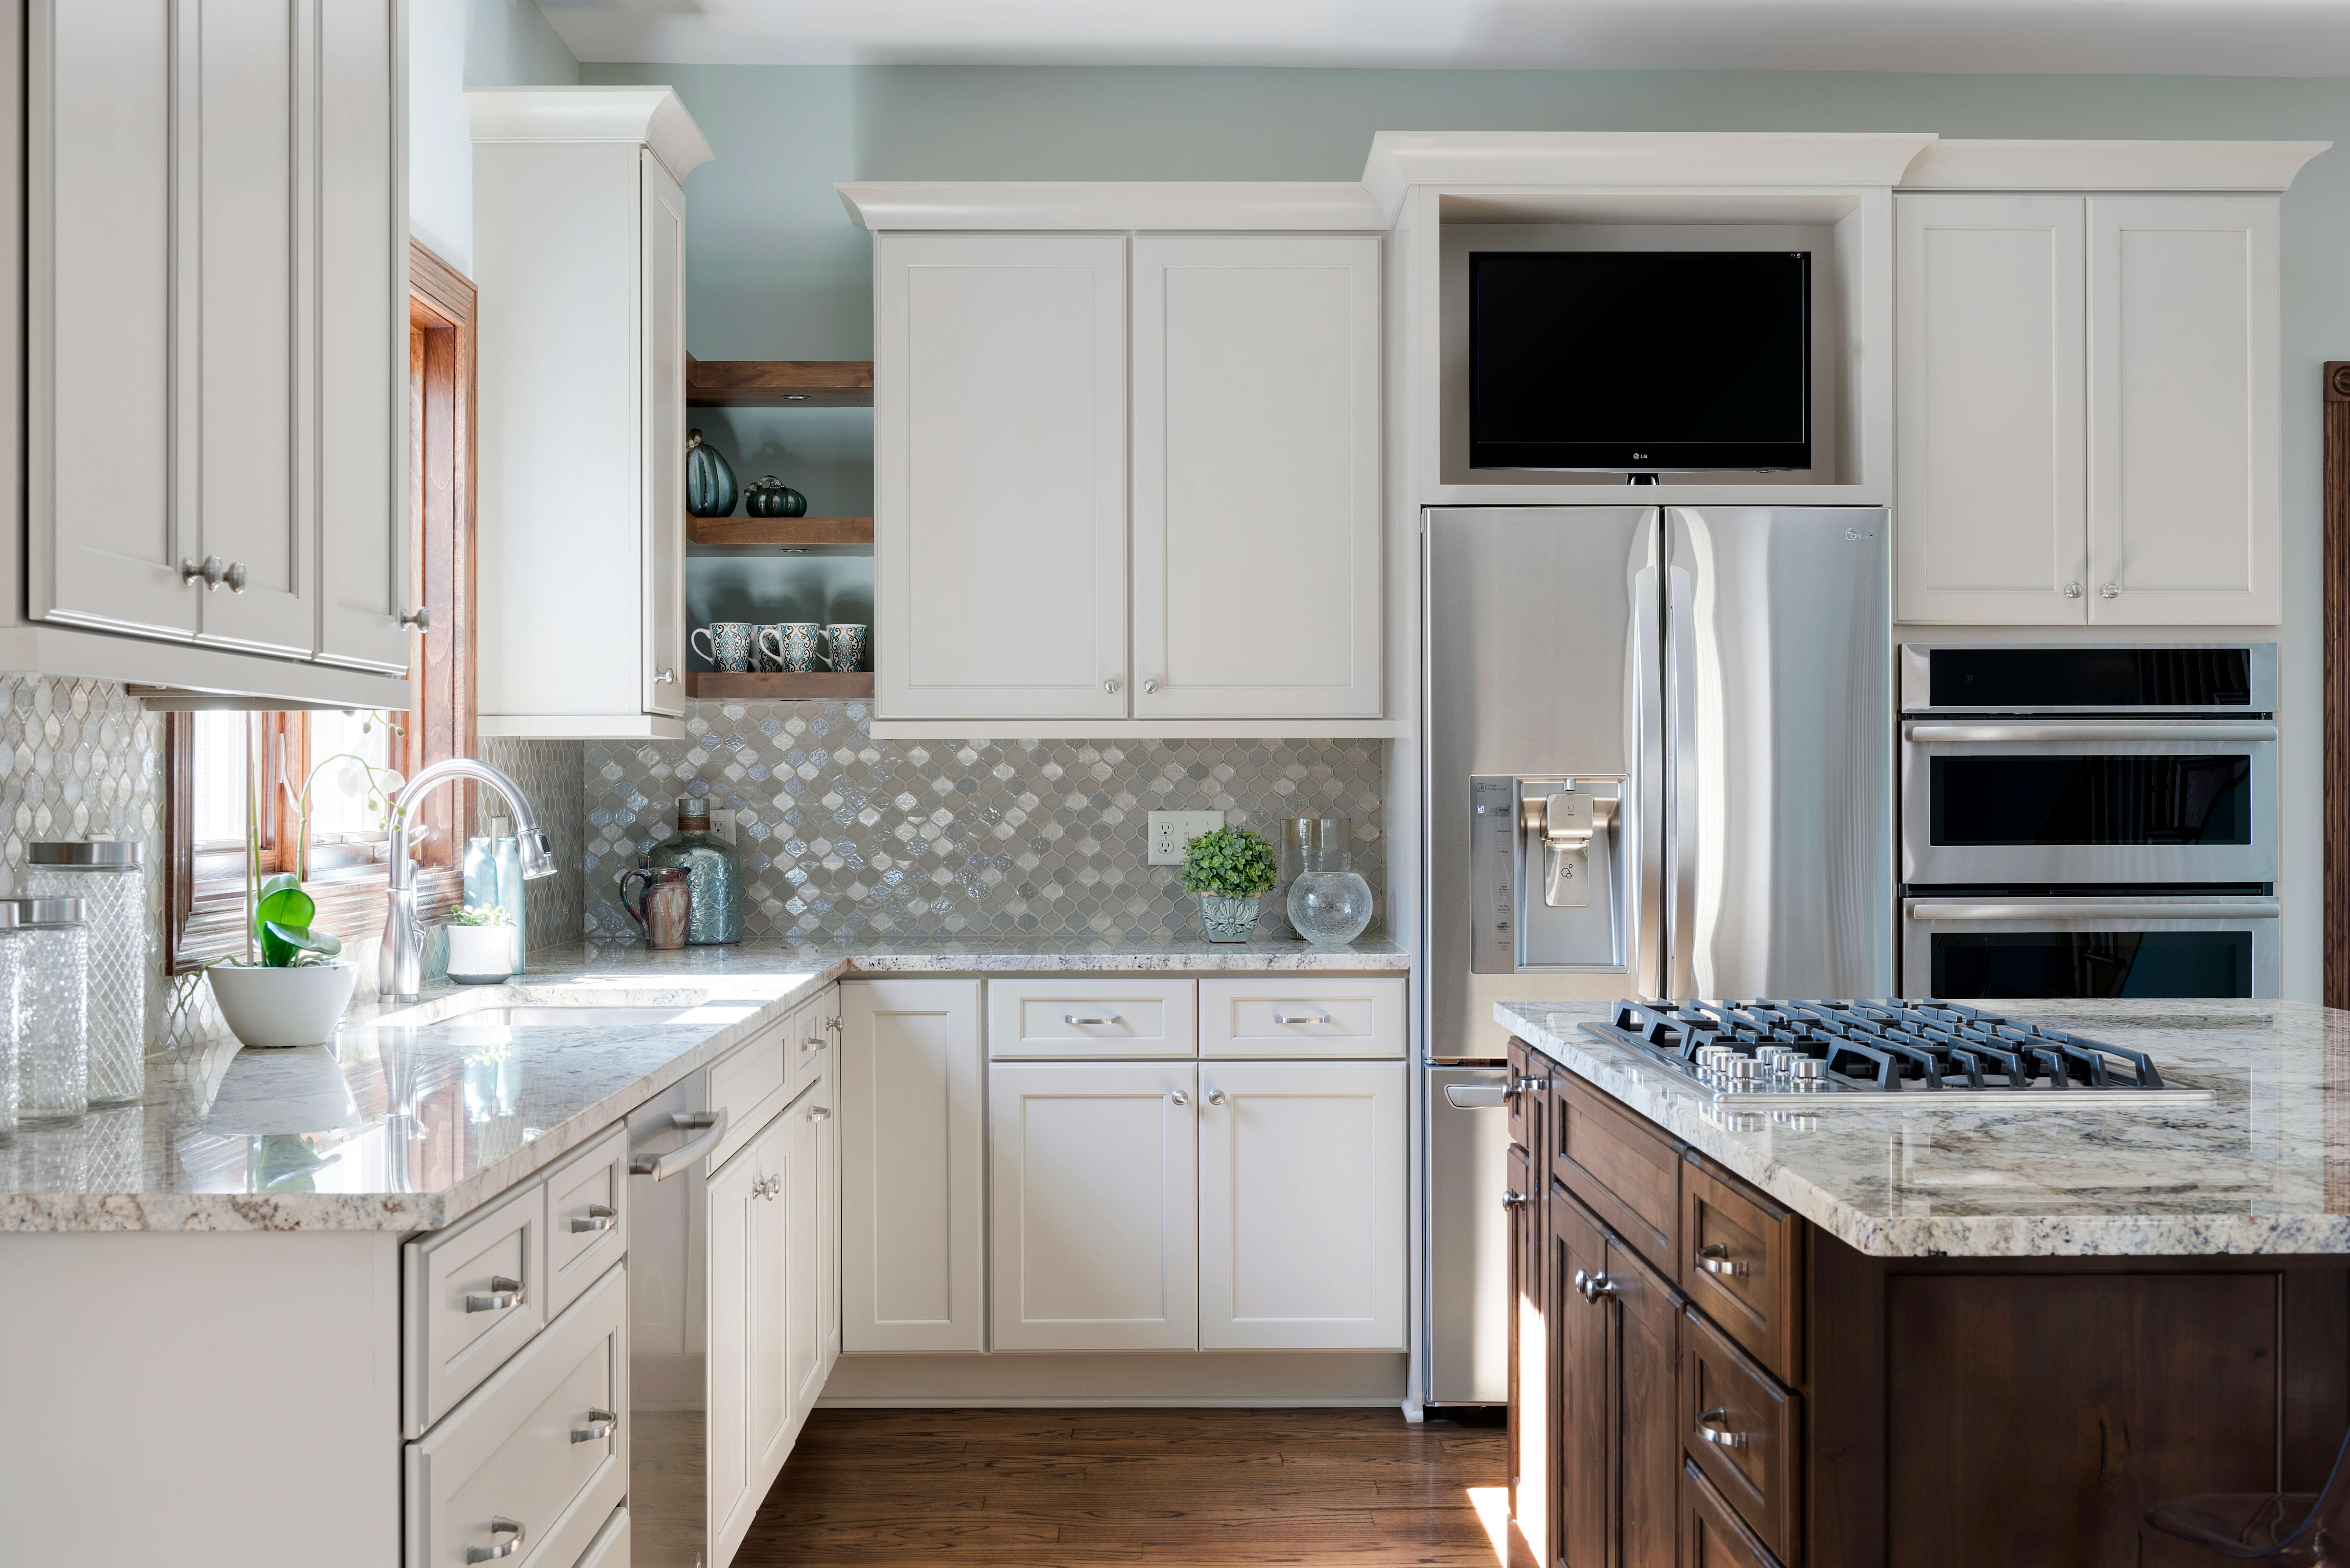 A bright kitchen design with white painted full overlay cabinet doors with a shaker style. The kitchen island and the corner floating shelves are accented with a dark stained wood. Pale blue accents are shown in the wall paint and glass mosaic backsplash tiles.